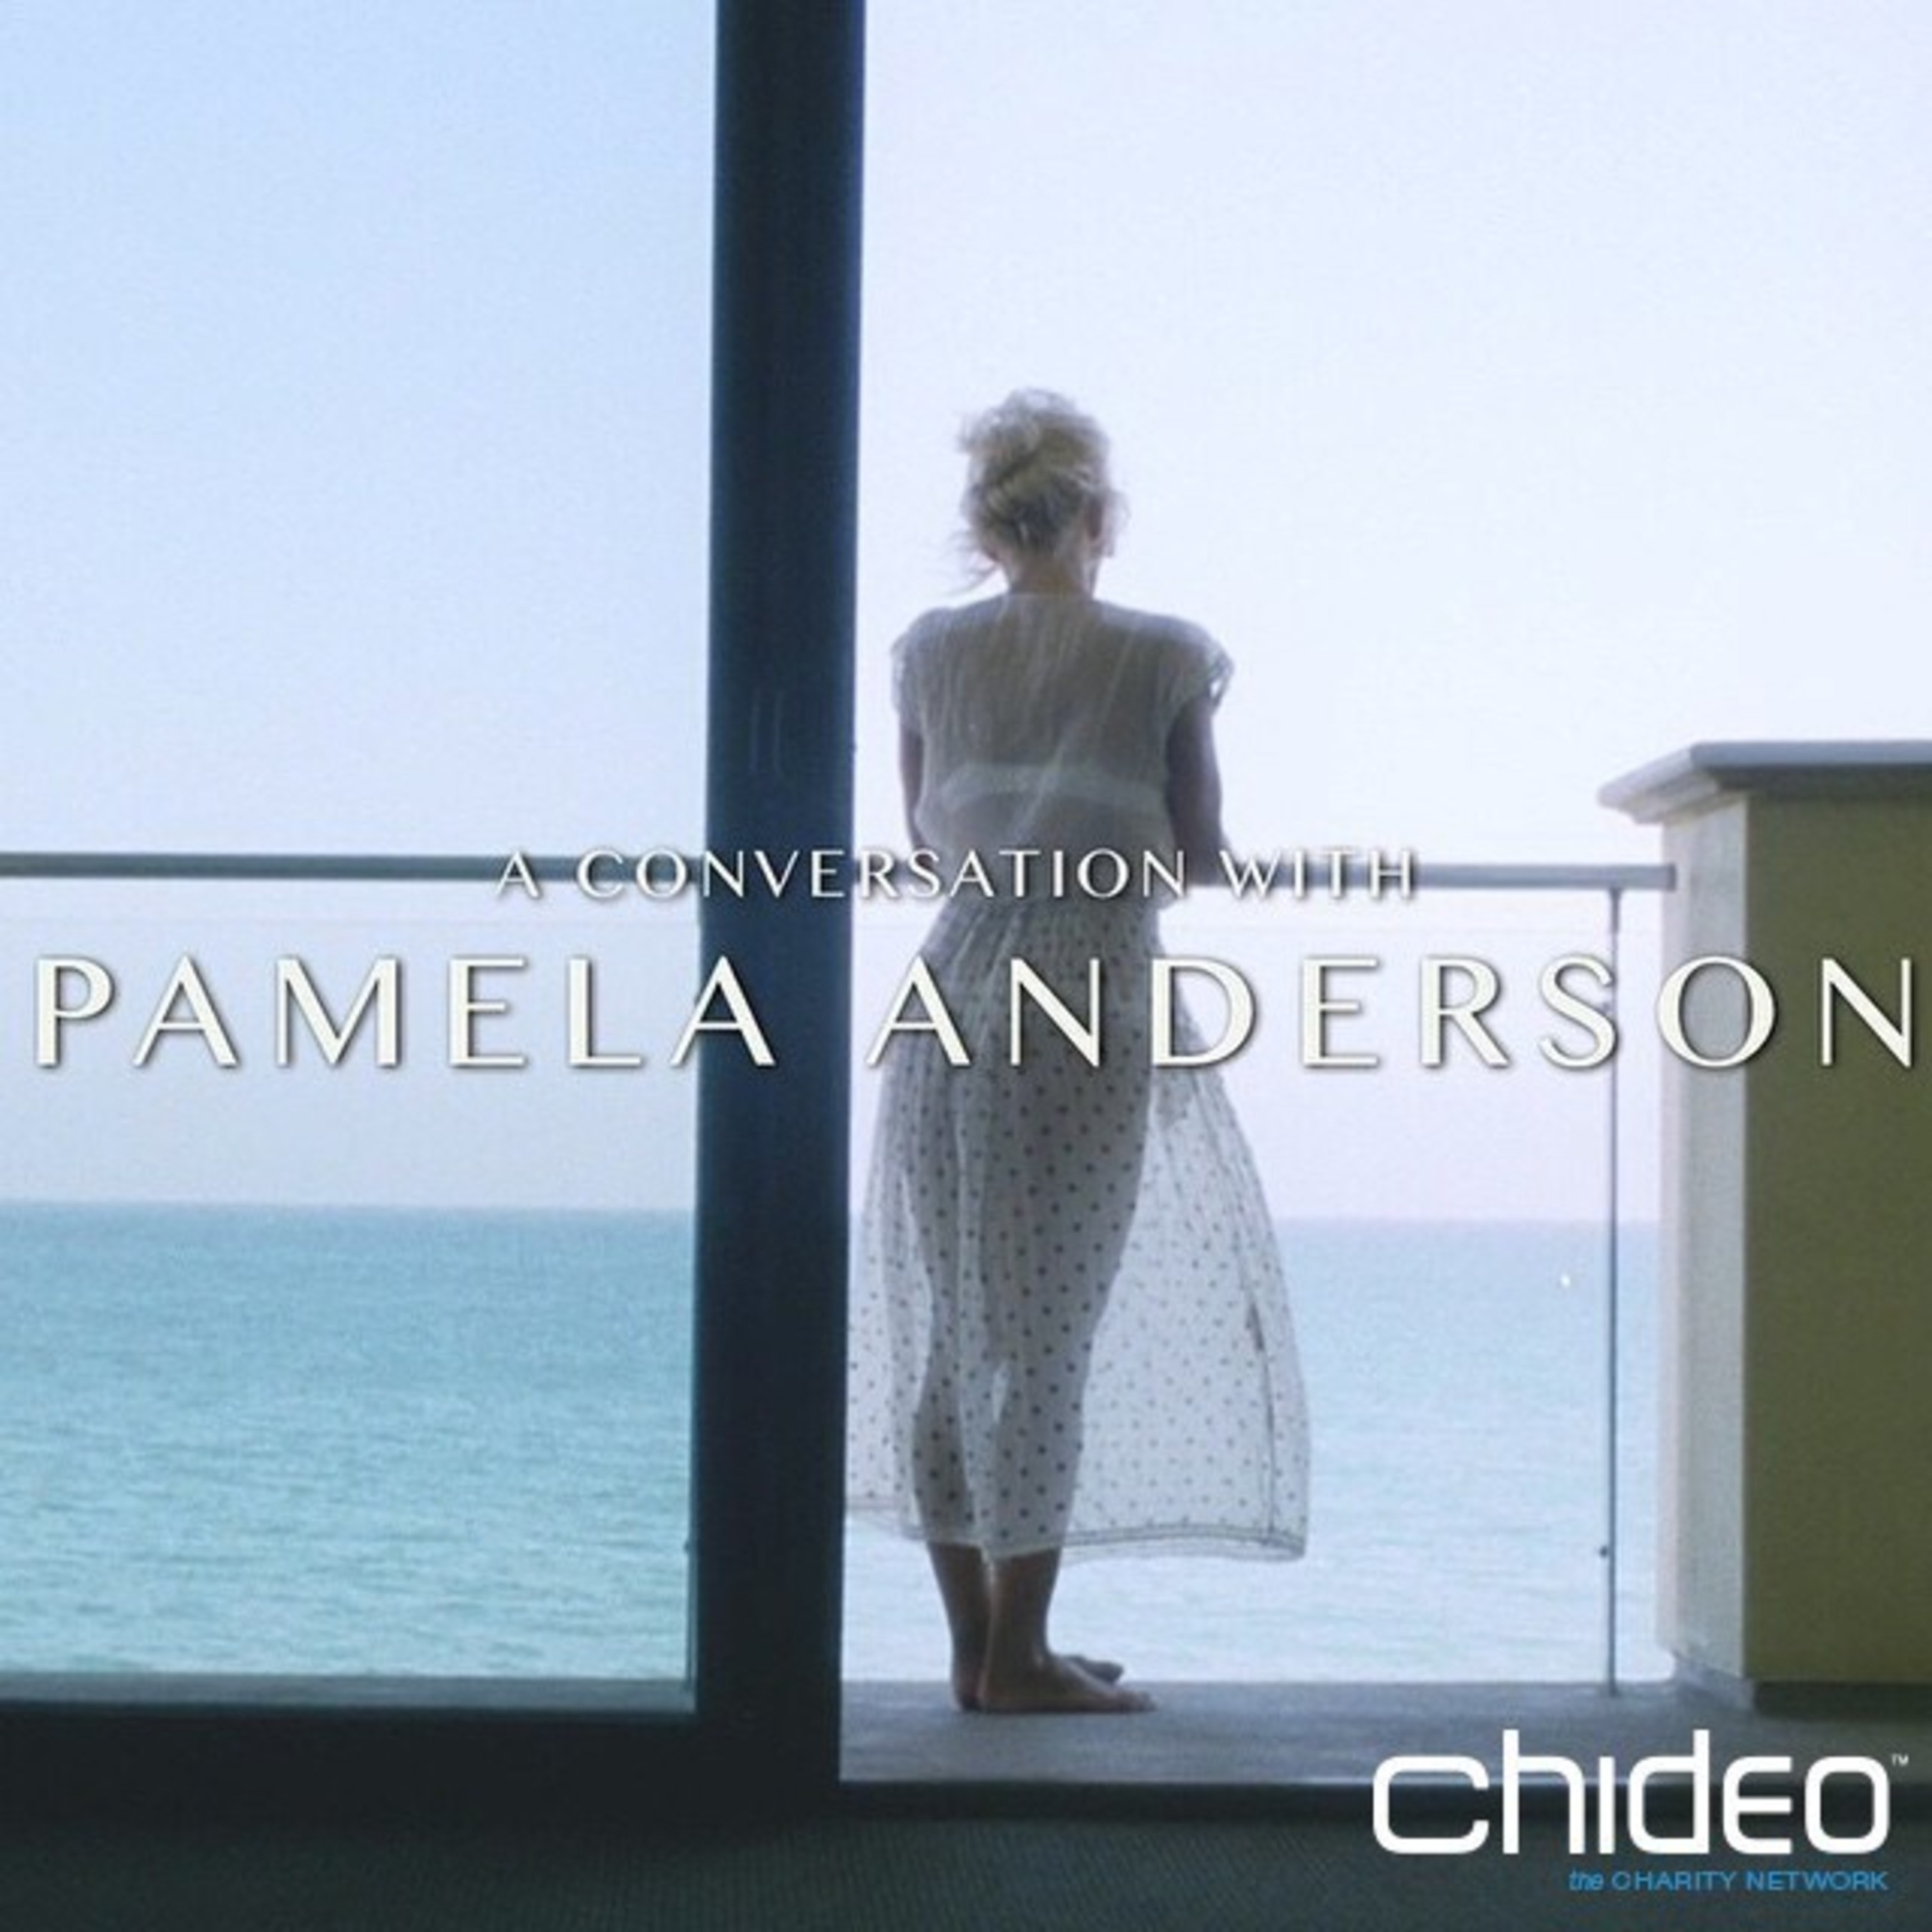 Chideo, the charity network, has partnered with the Pamela Anderson Foundation on a revealing new documentary designed to raise money for animal and human rights charities and to inspire people to become activists for the planet we all share. The two-part film premieres Wednesday, Nov. 19 at 7 p.m. EST, on Chideo.com.